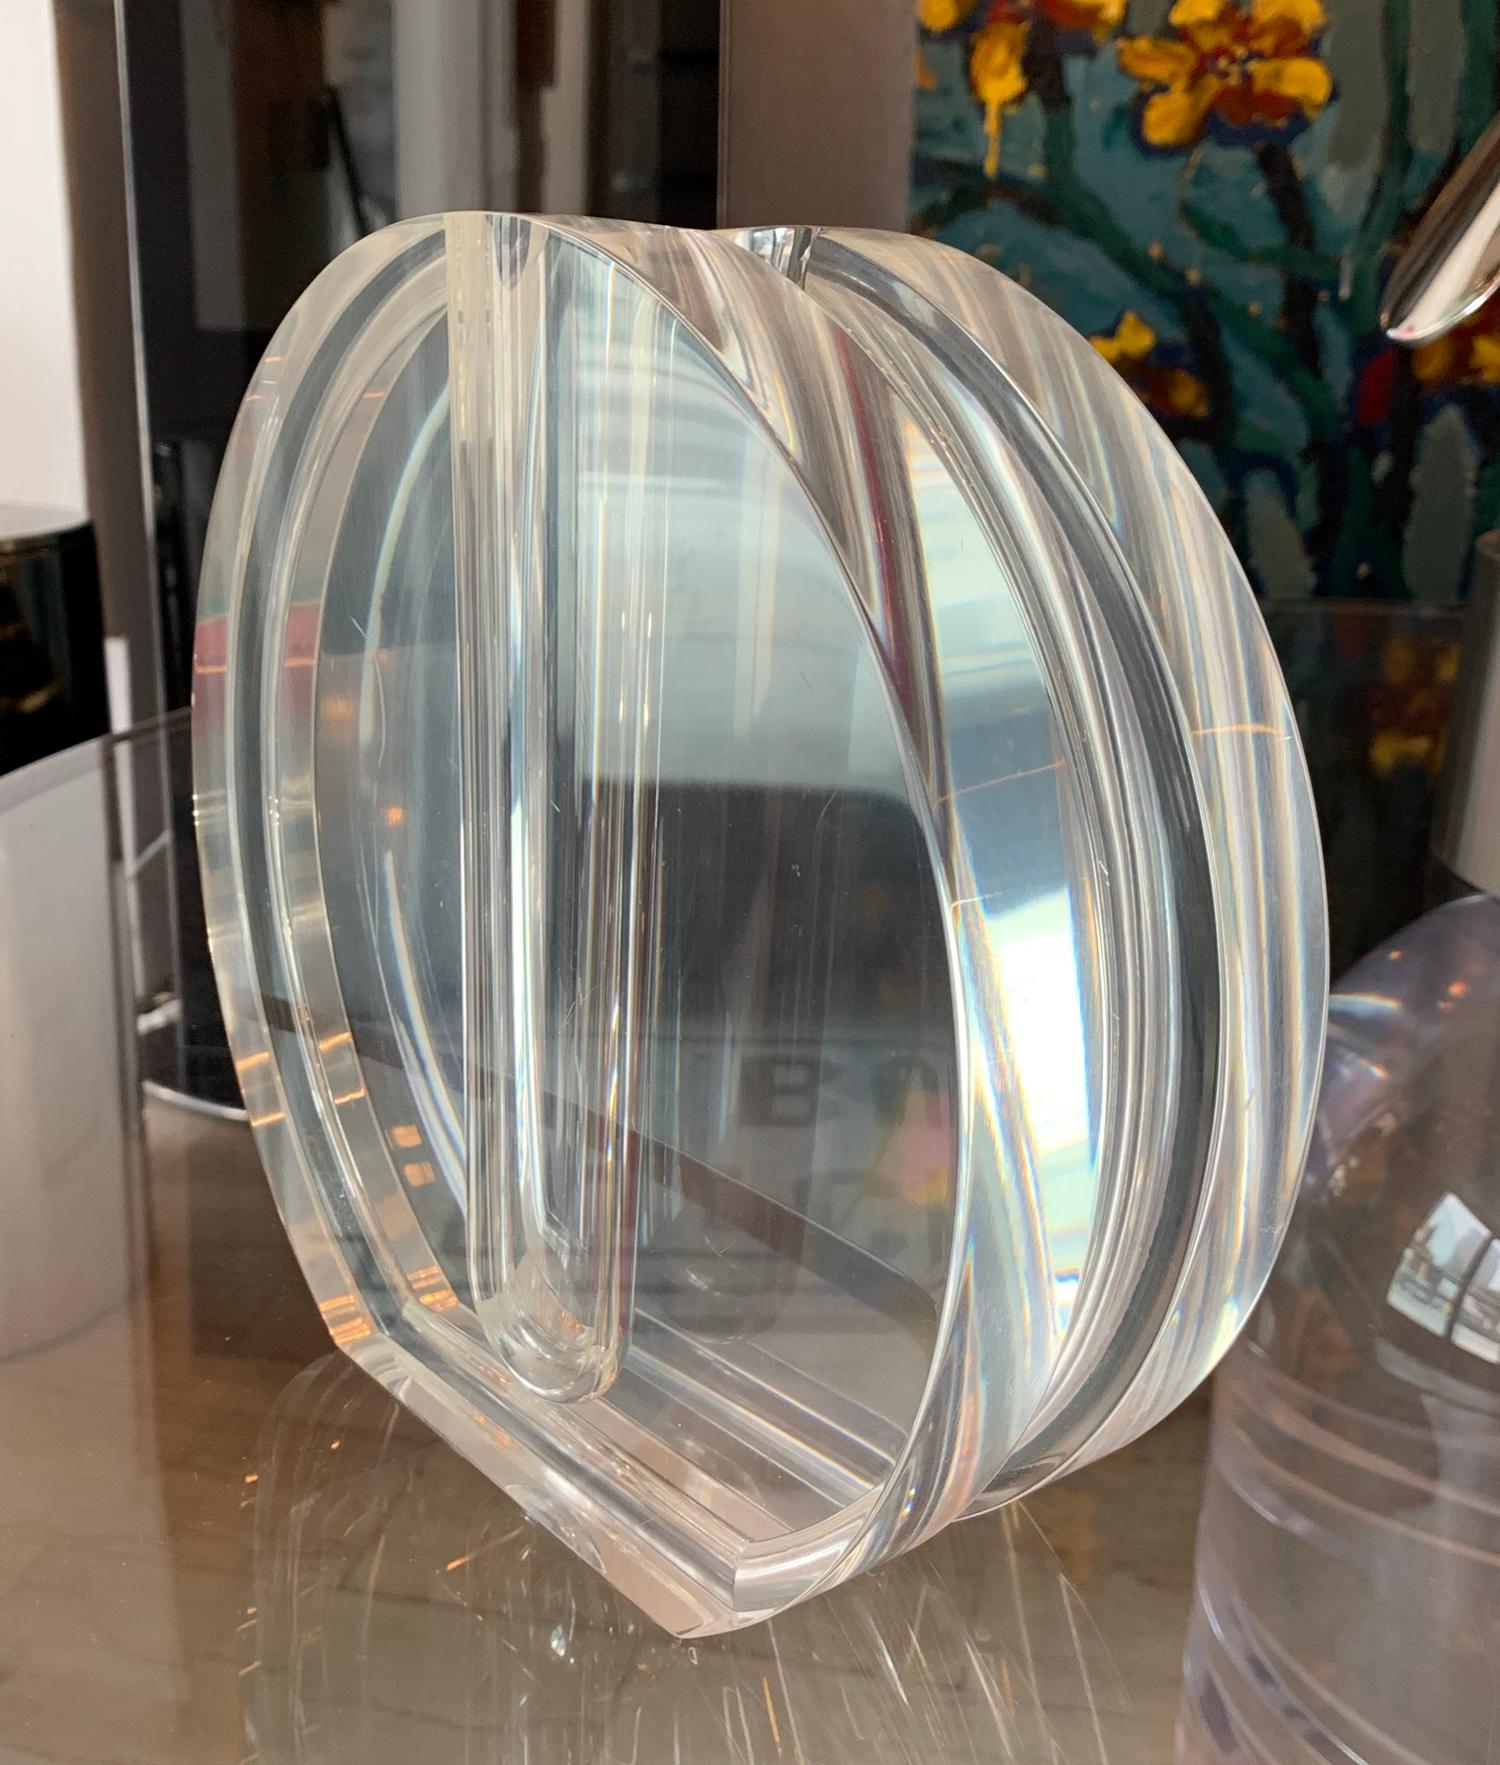 Vintage 1970s Lucite vase designed and manufactured by Charles Hollis Jones.
The piece is beautifully crafted in one piece of 3 1/2